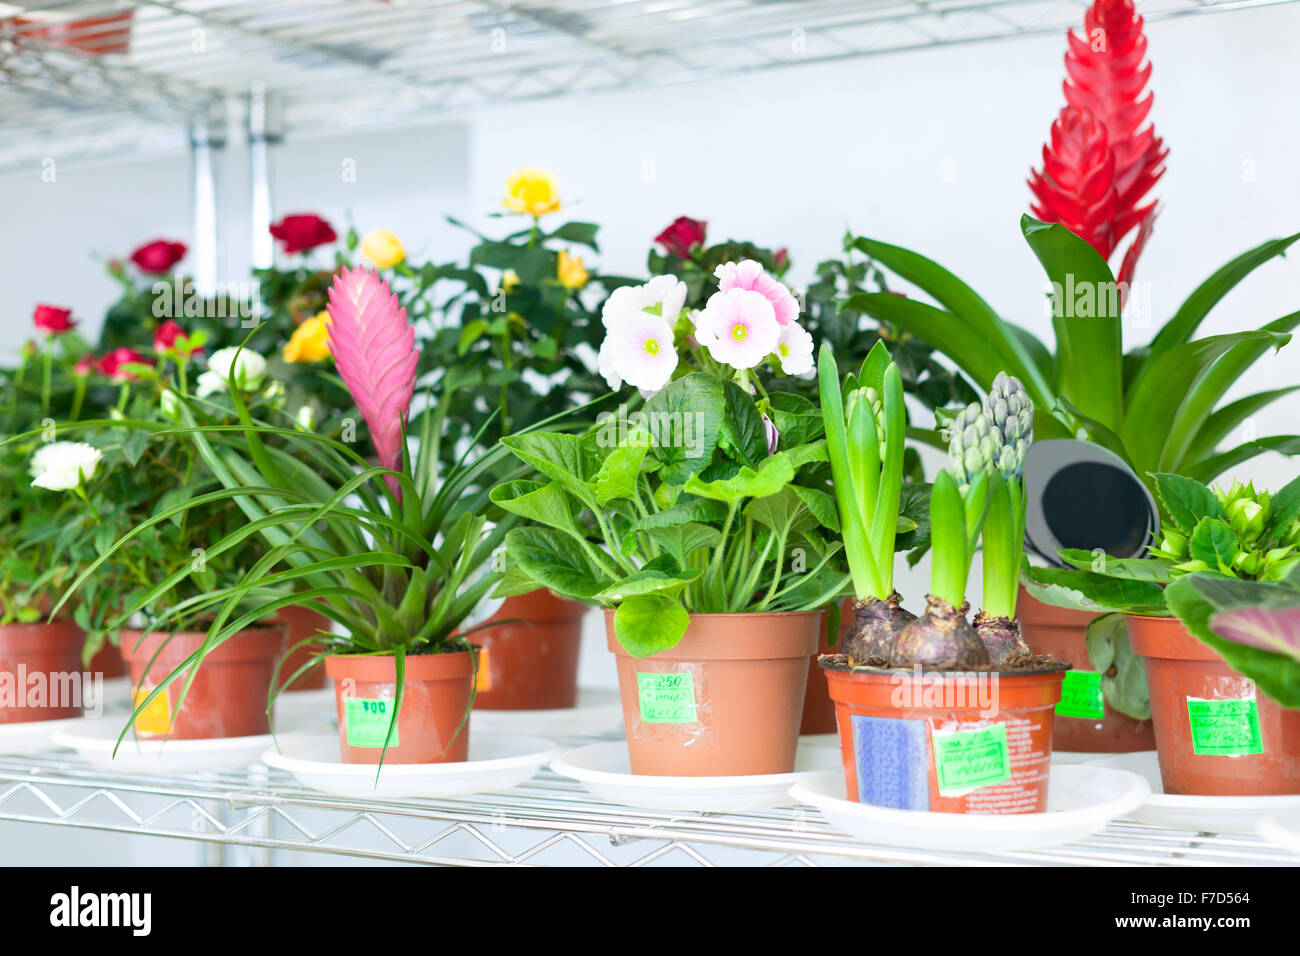 Shelves with different flowers in pots Stock Photo